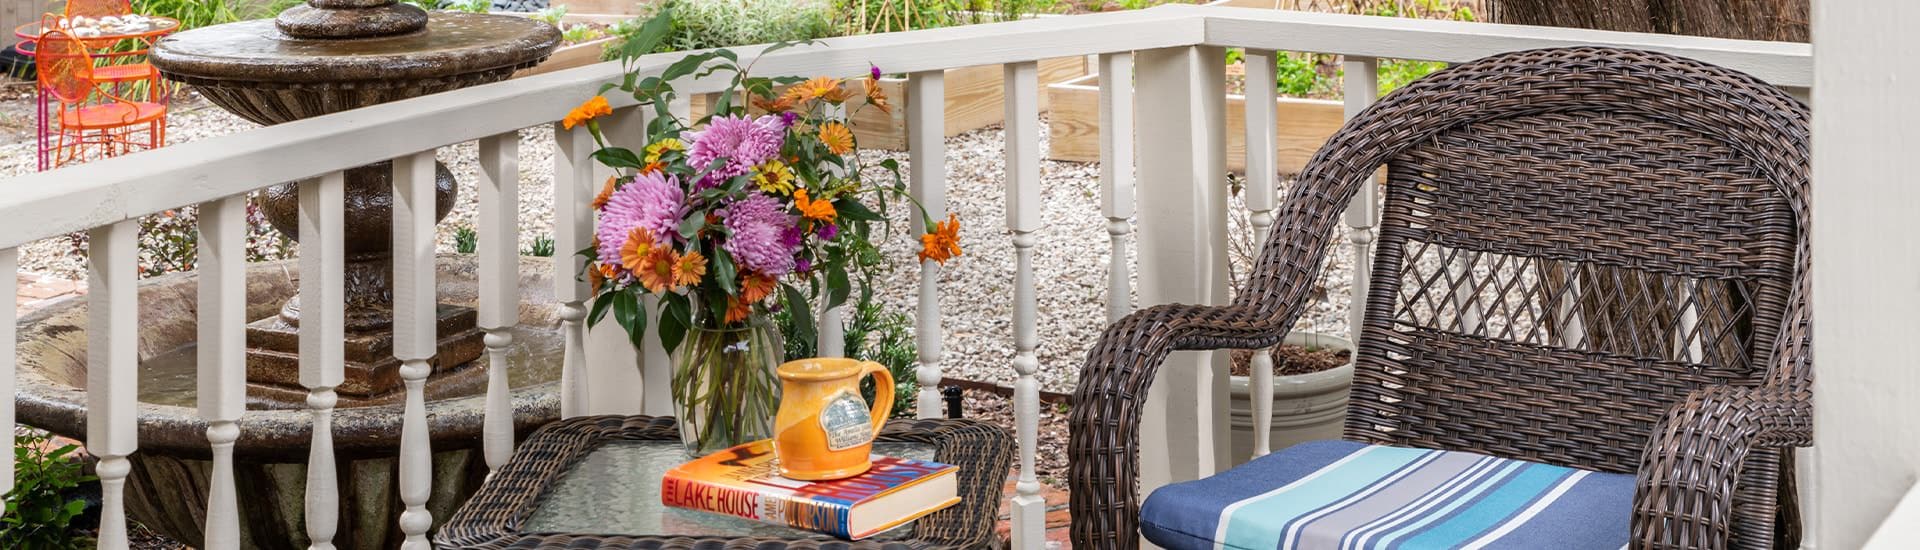 Close up view of purple and orange flowers in vase, orange stoneware mug, and book sitting on dark wicker patio table next to patio chair